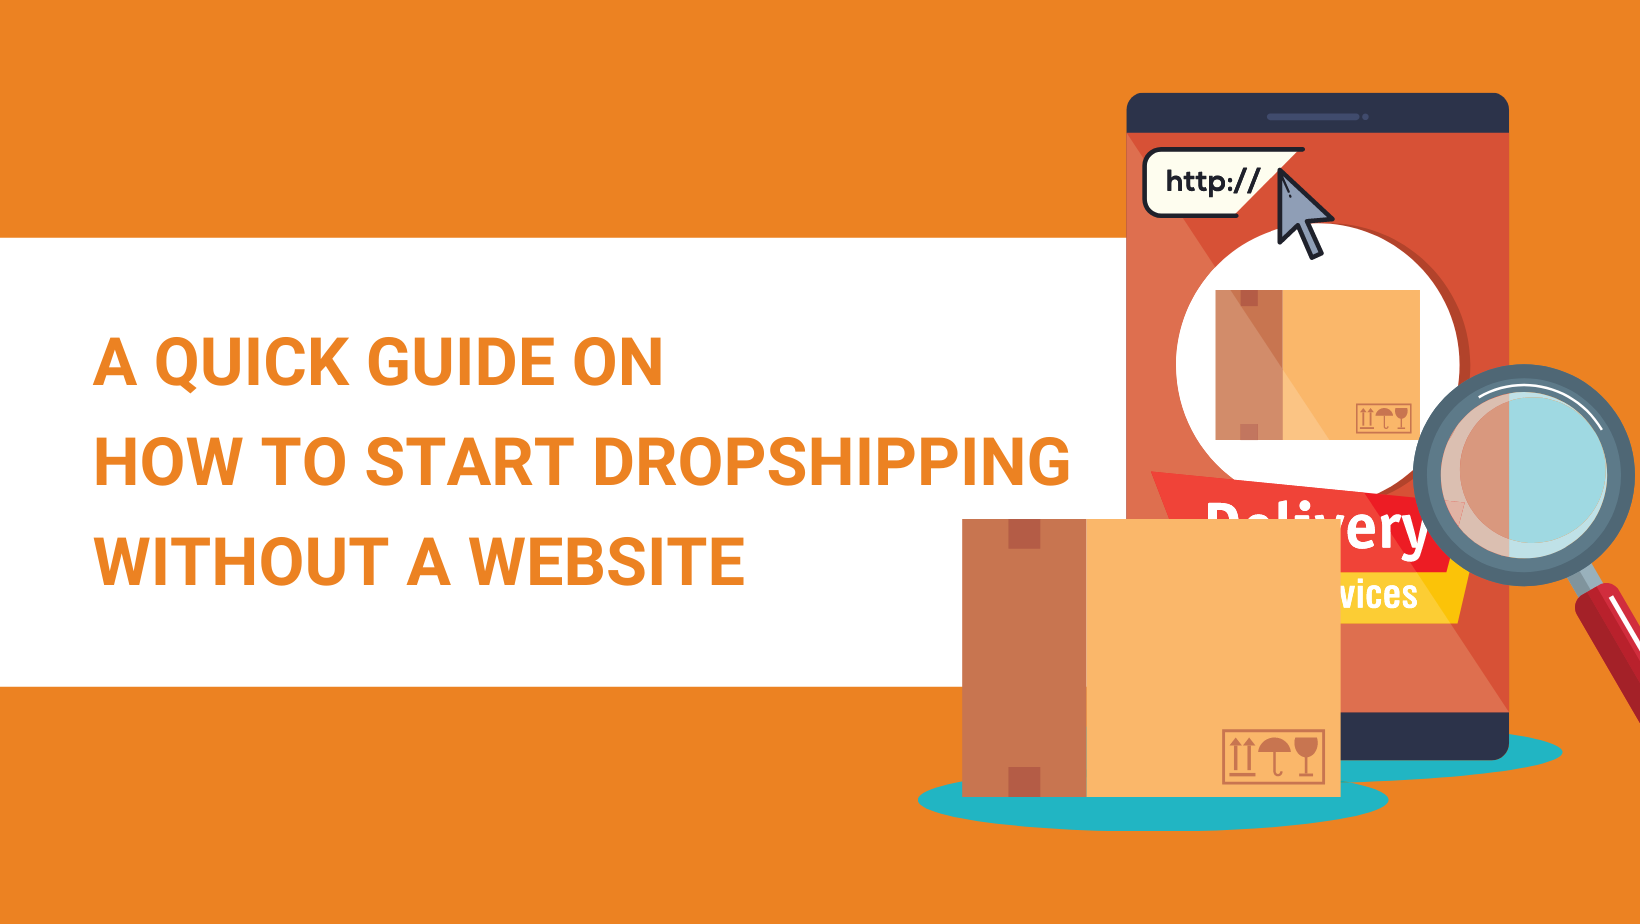 A QUICK GUIDE ON HOW TO START DROPSHIPPING WITHOUT A WEBSITE